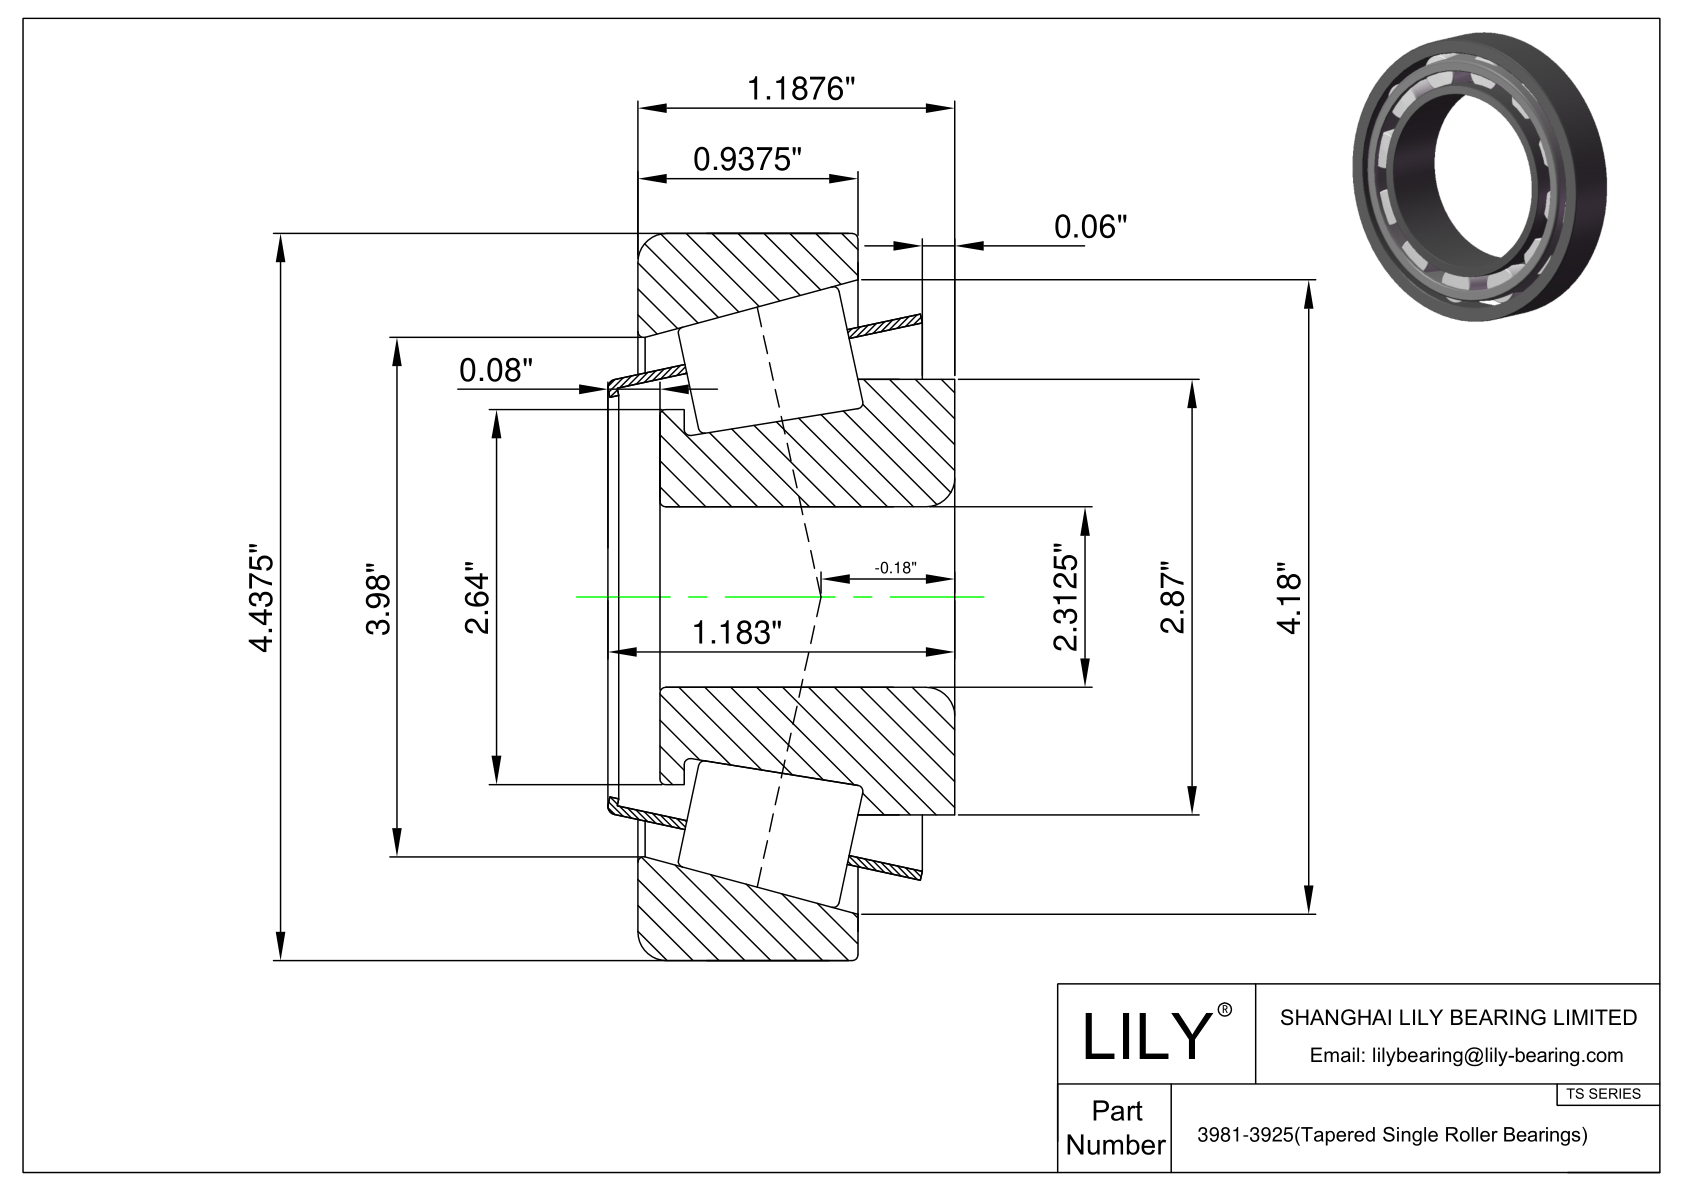 3981-3925 TS (Tapered Single Roller Bearings) (Imperial) cad drawing